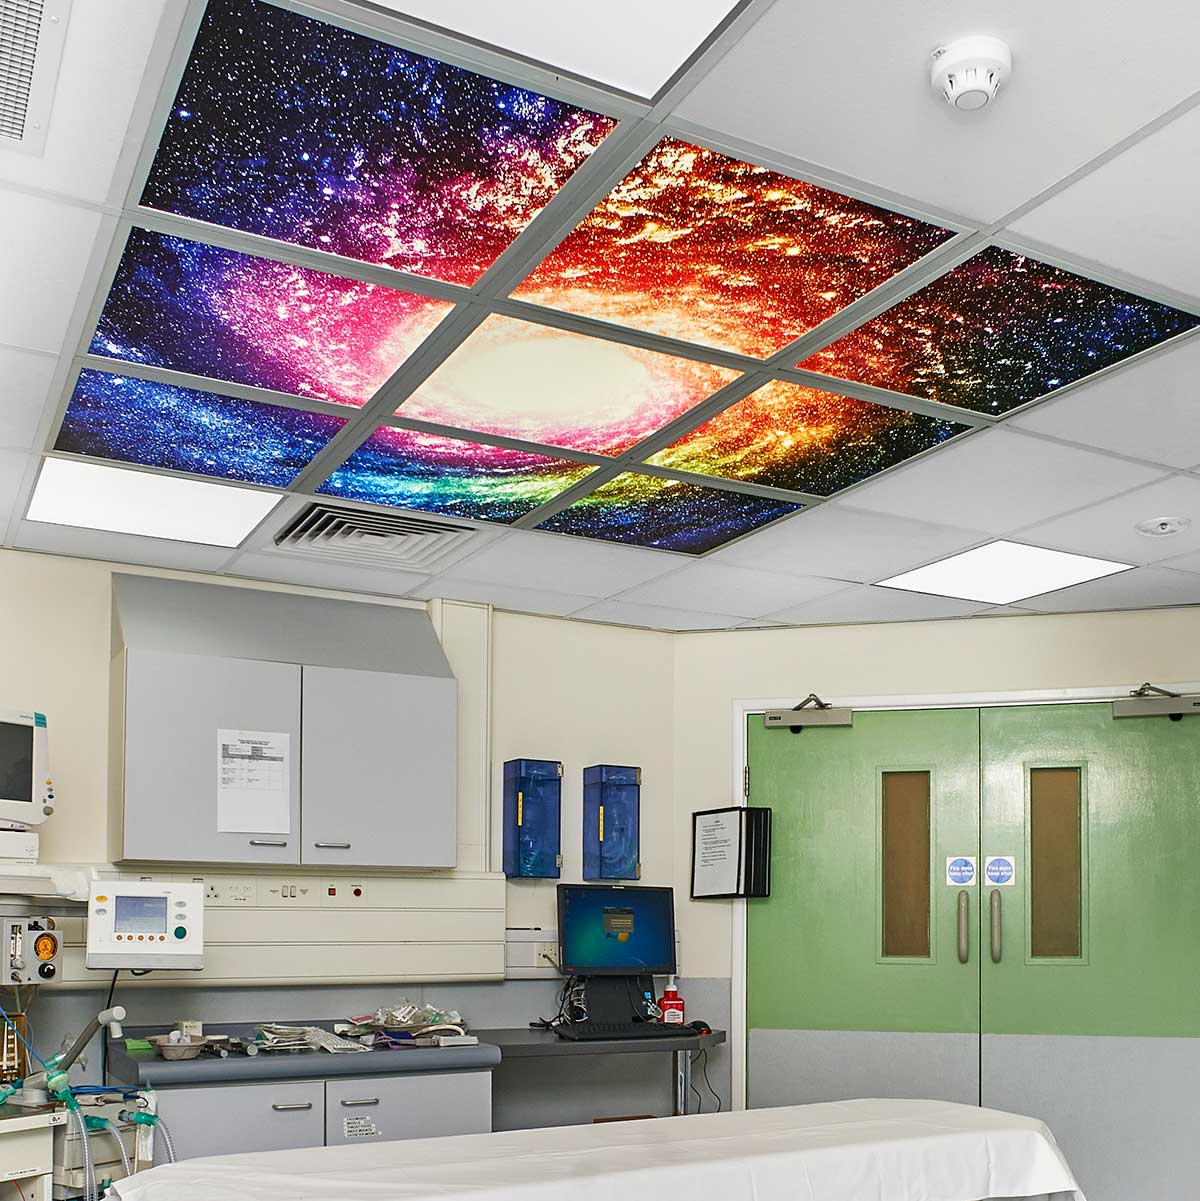 A vivid & colourful display of a spiral galaxy with a collection of stars placed within a hospital room space.